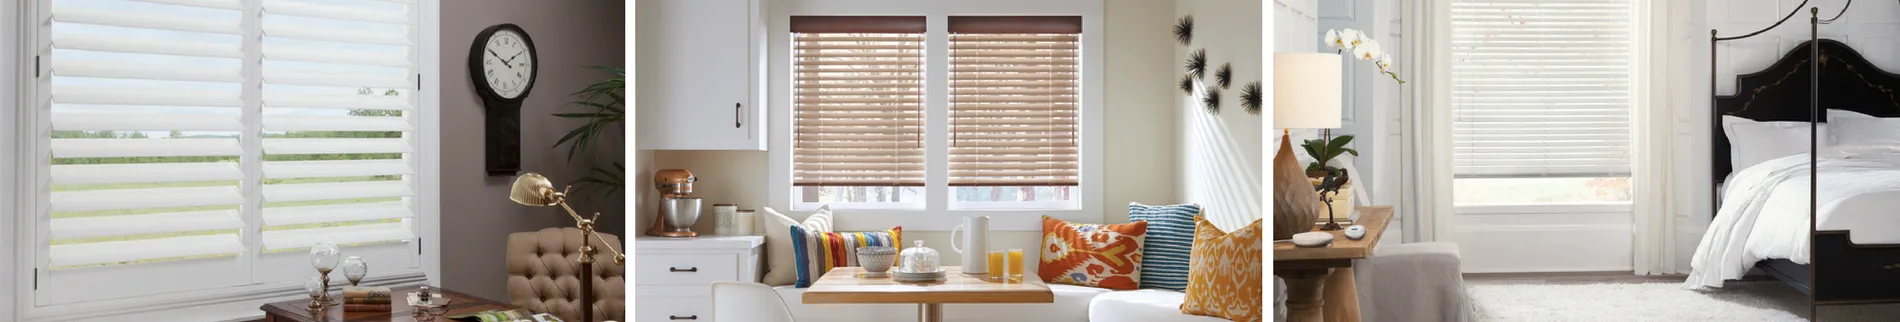 window treatments in white rooms